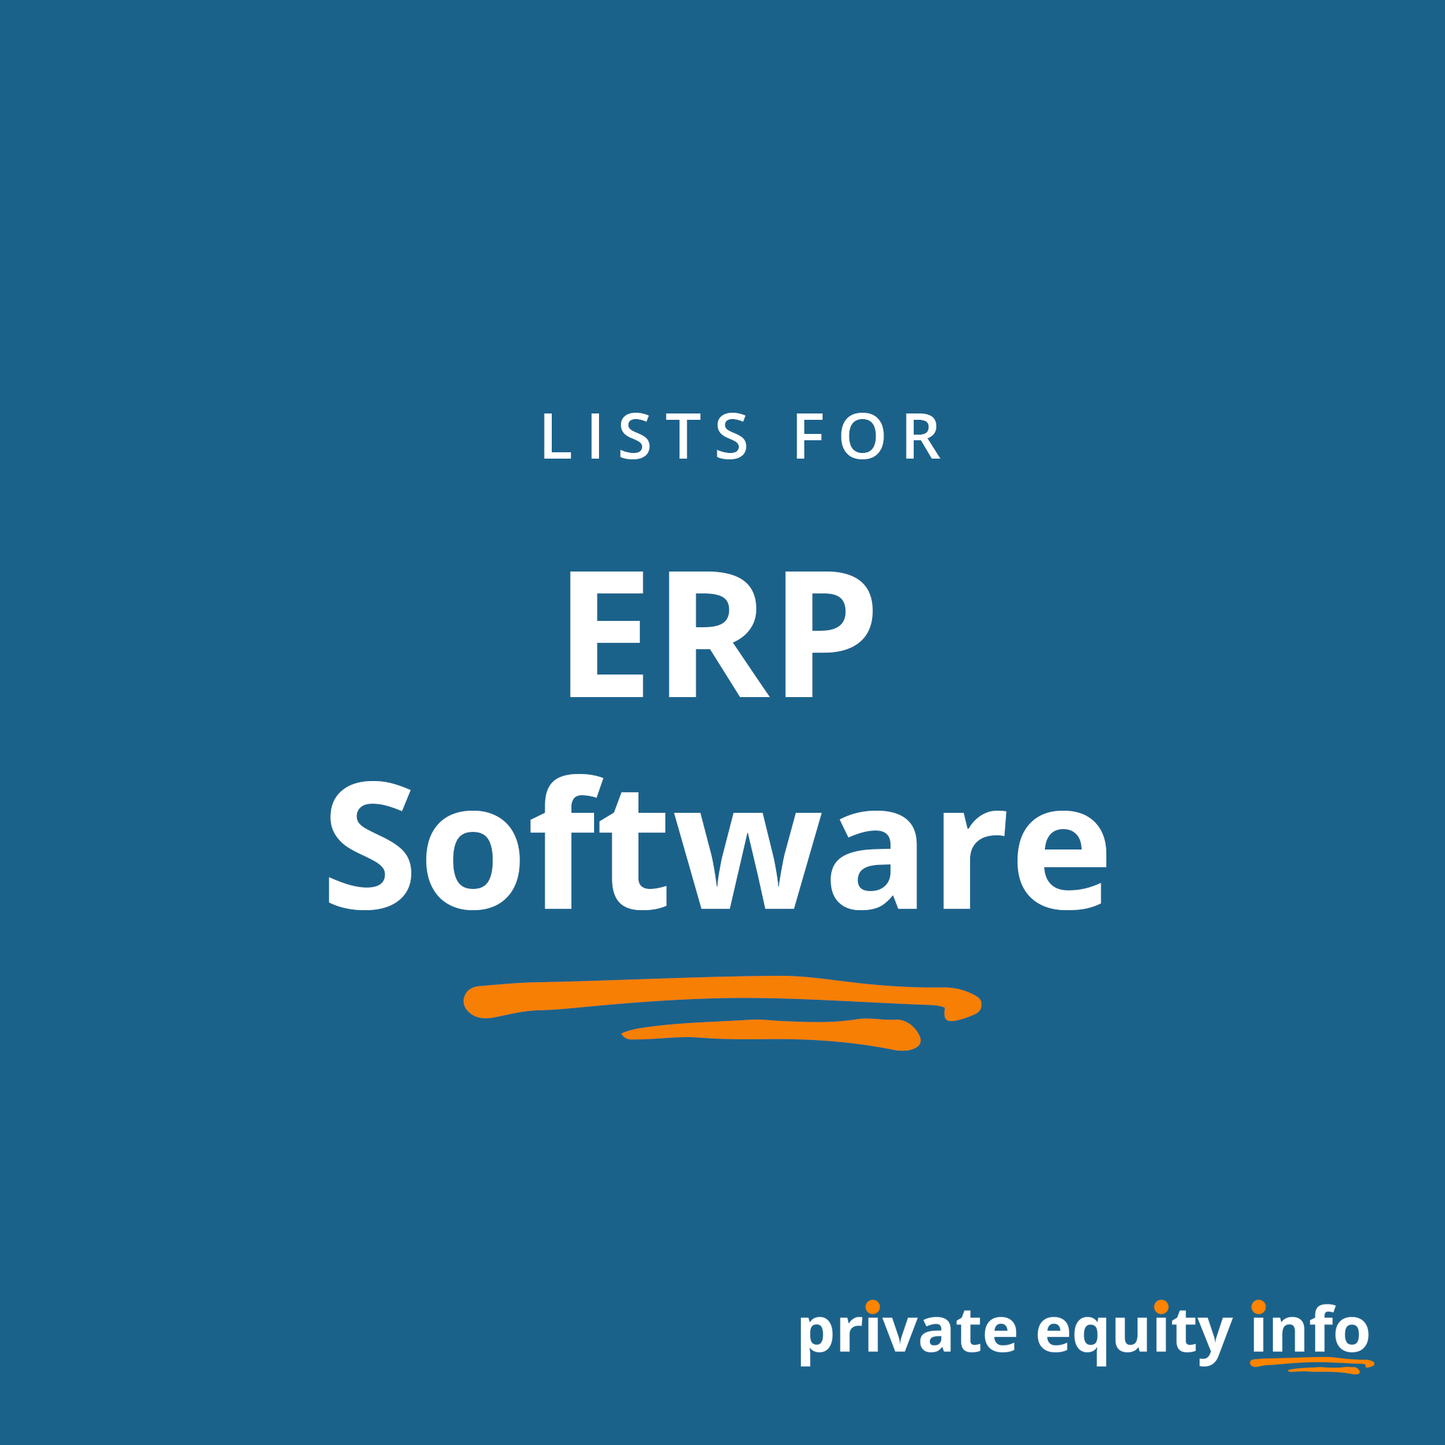 List of Private Equity Firms in ERP Software